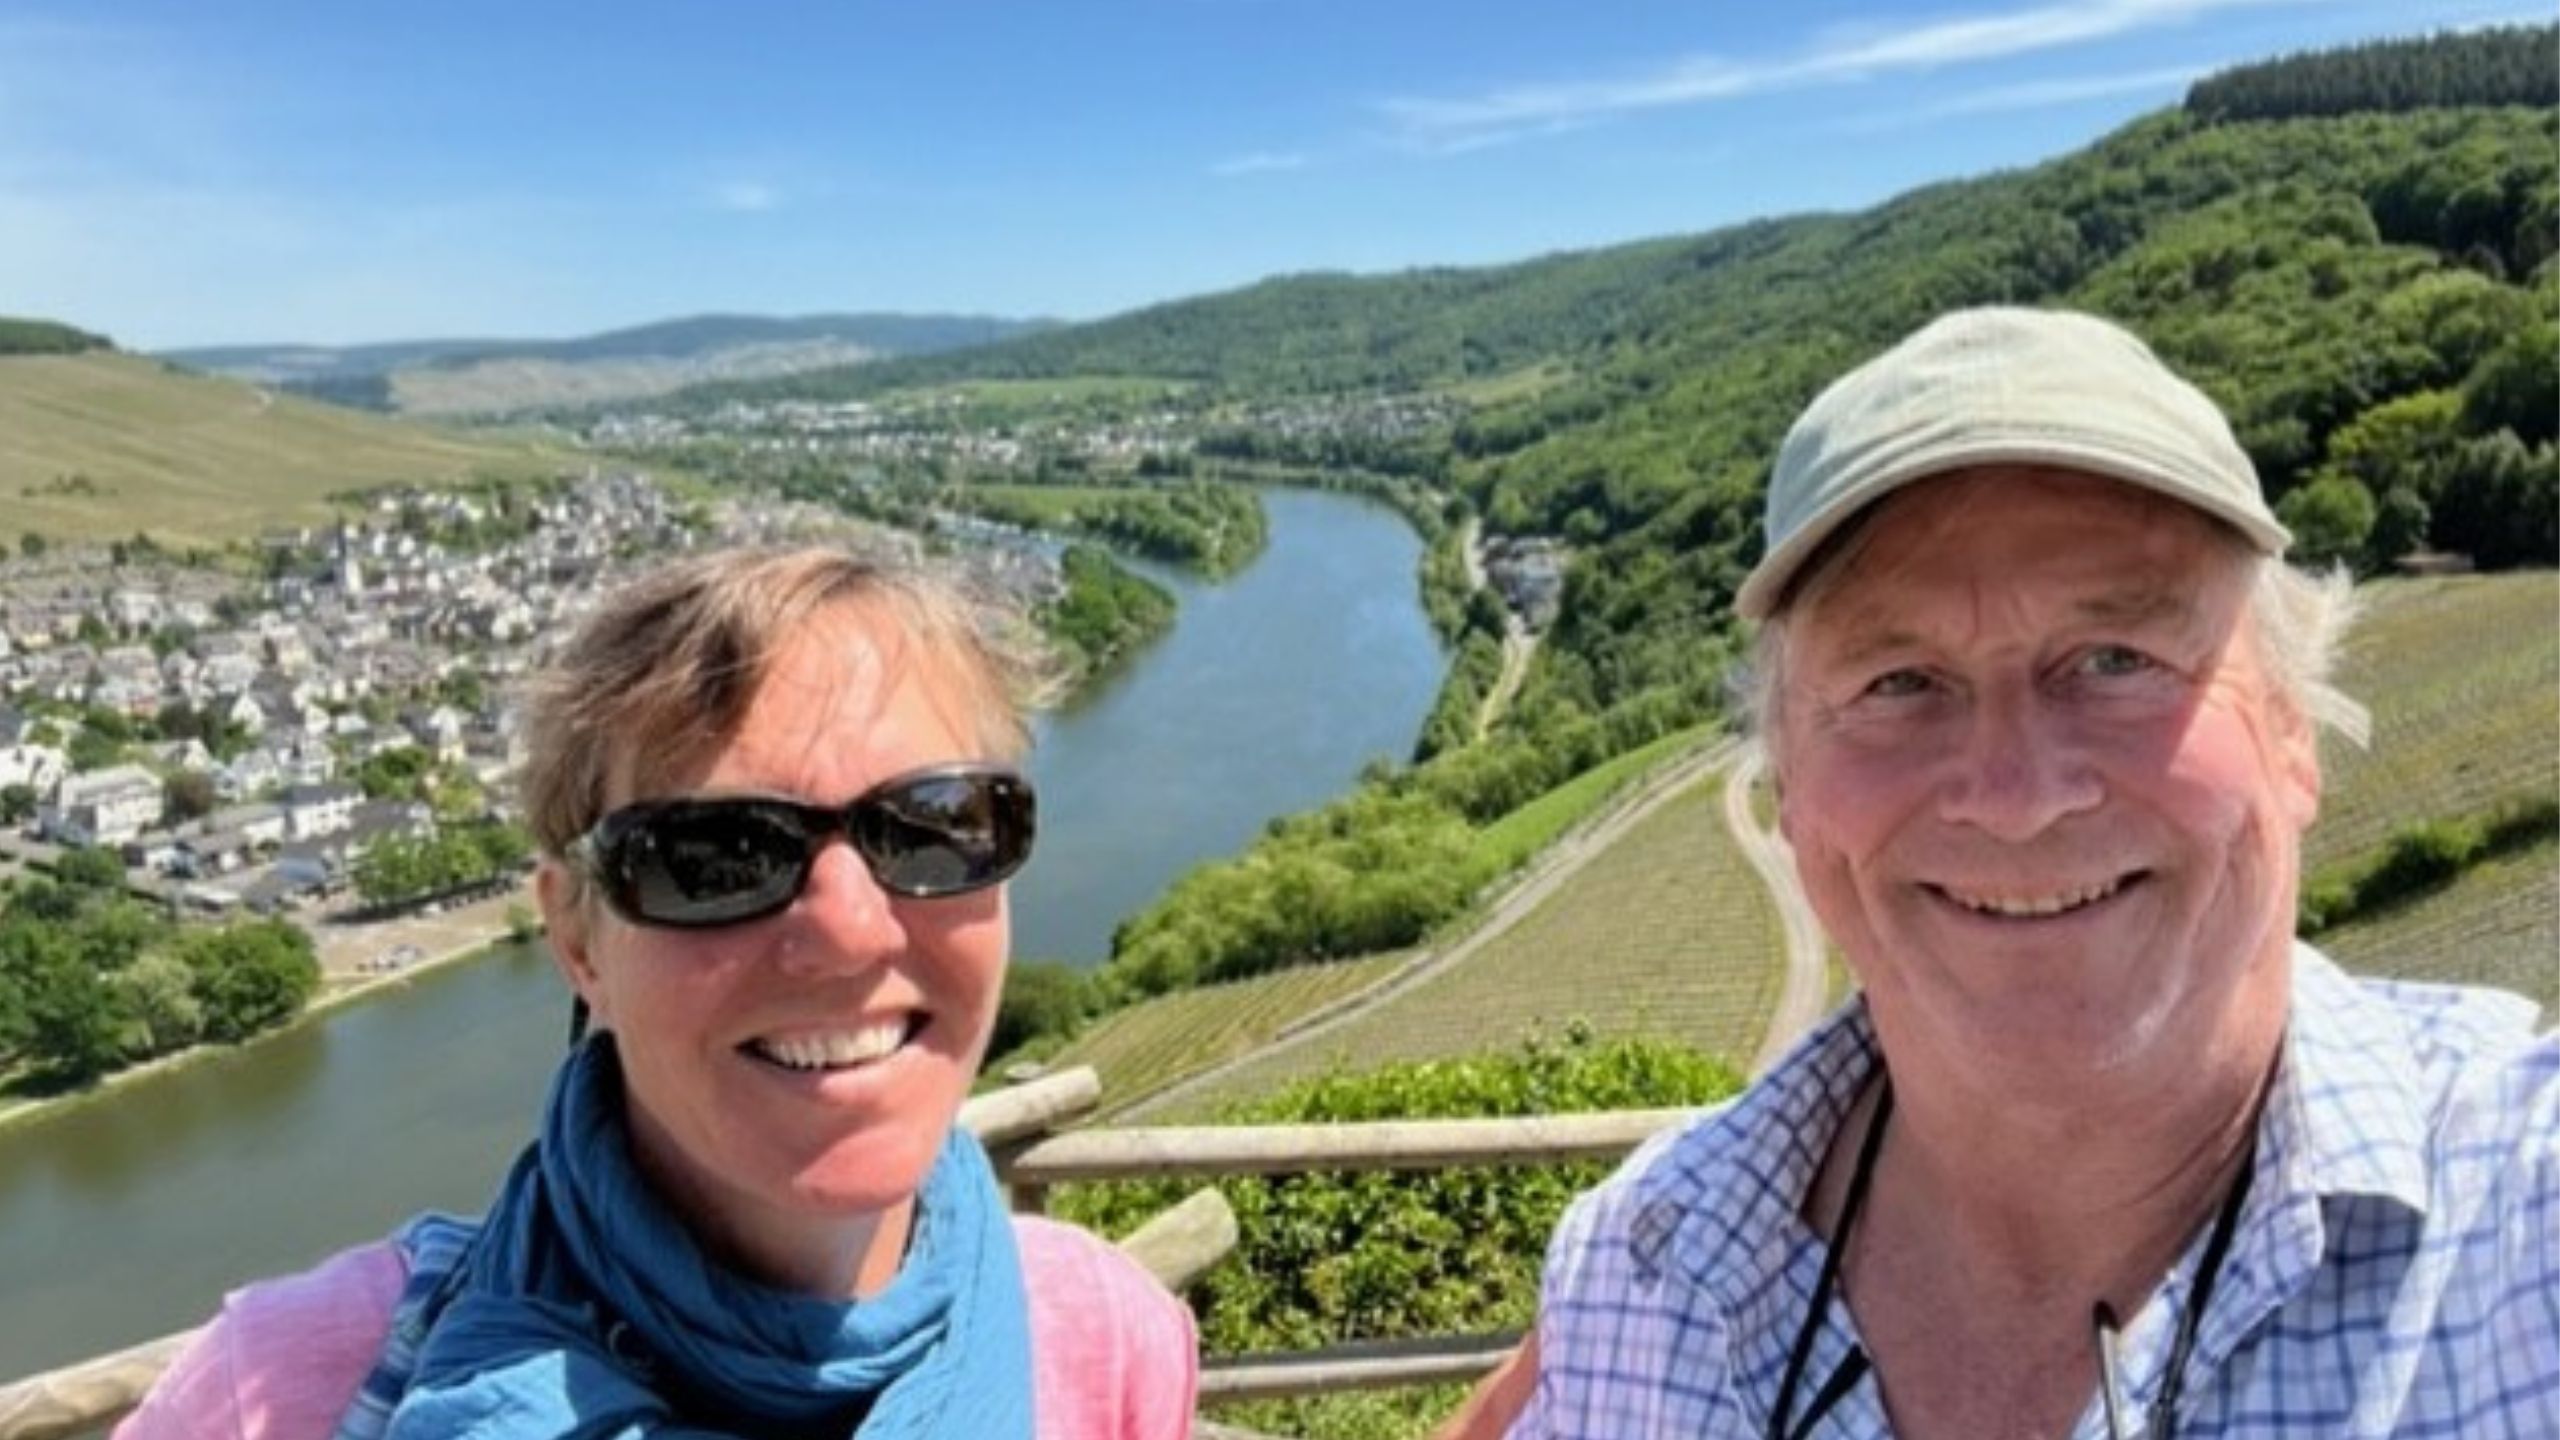 David and his wife in Germany, living up their retirement. (Source: supplied).